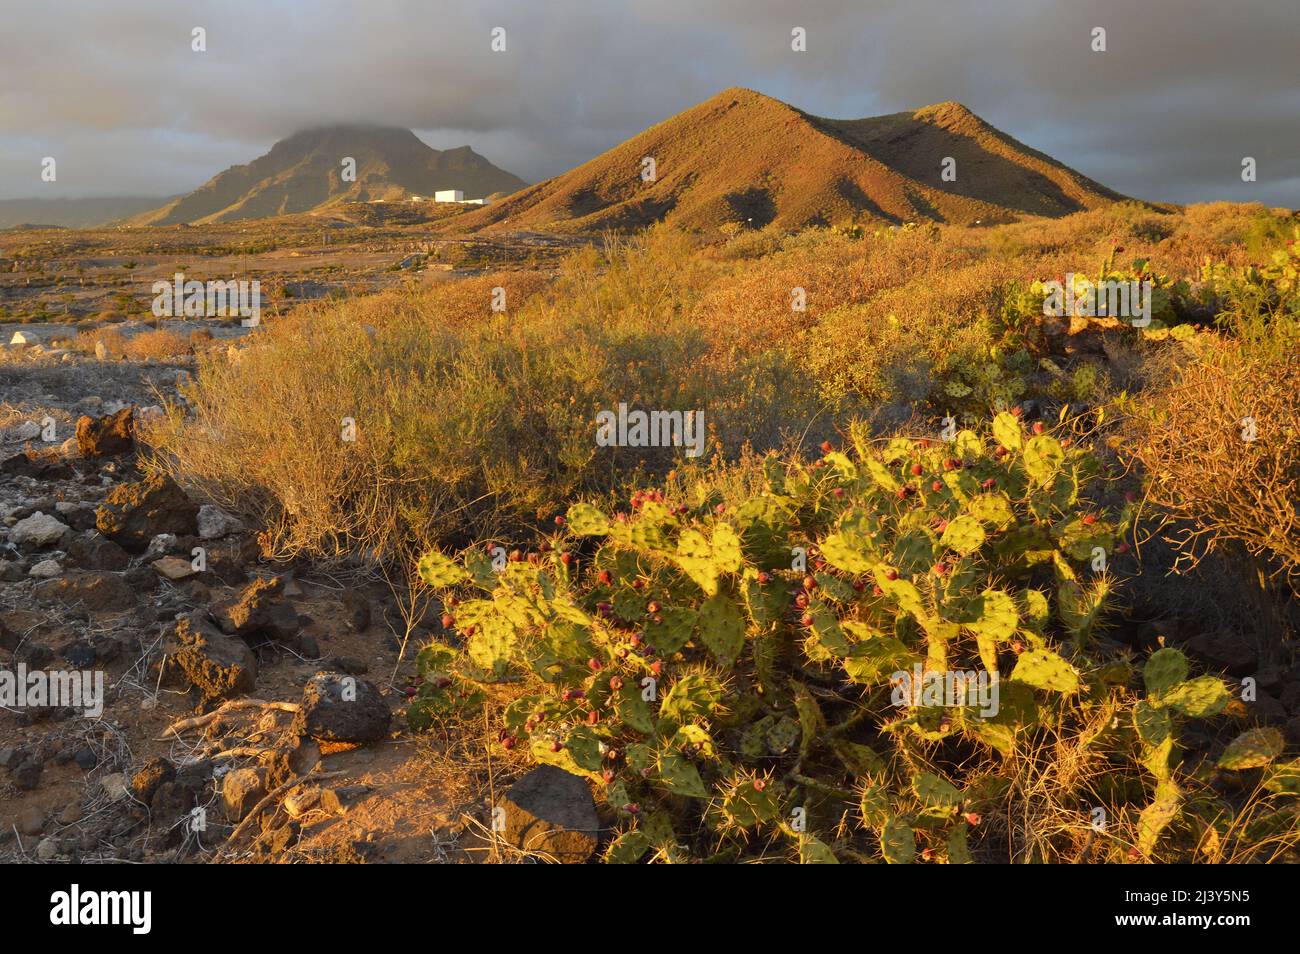 Opuntia dillenii (Prickly pear) cacti growing in the arid volcanic landscape of Arona in the southwest of Tenerife Canary Islands Spain. Stock Photo